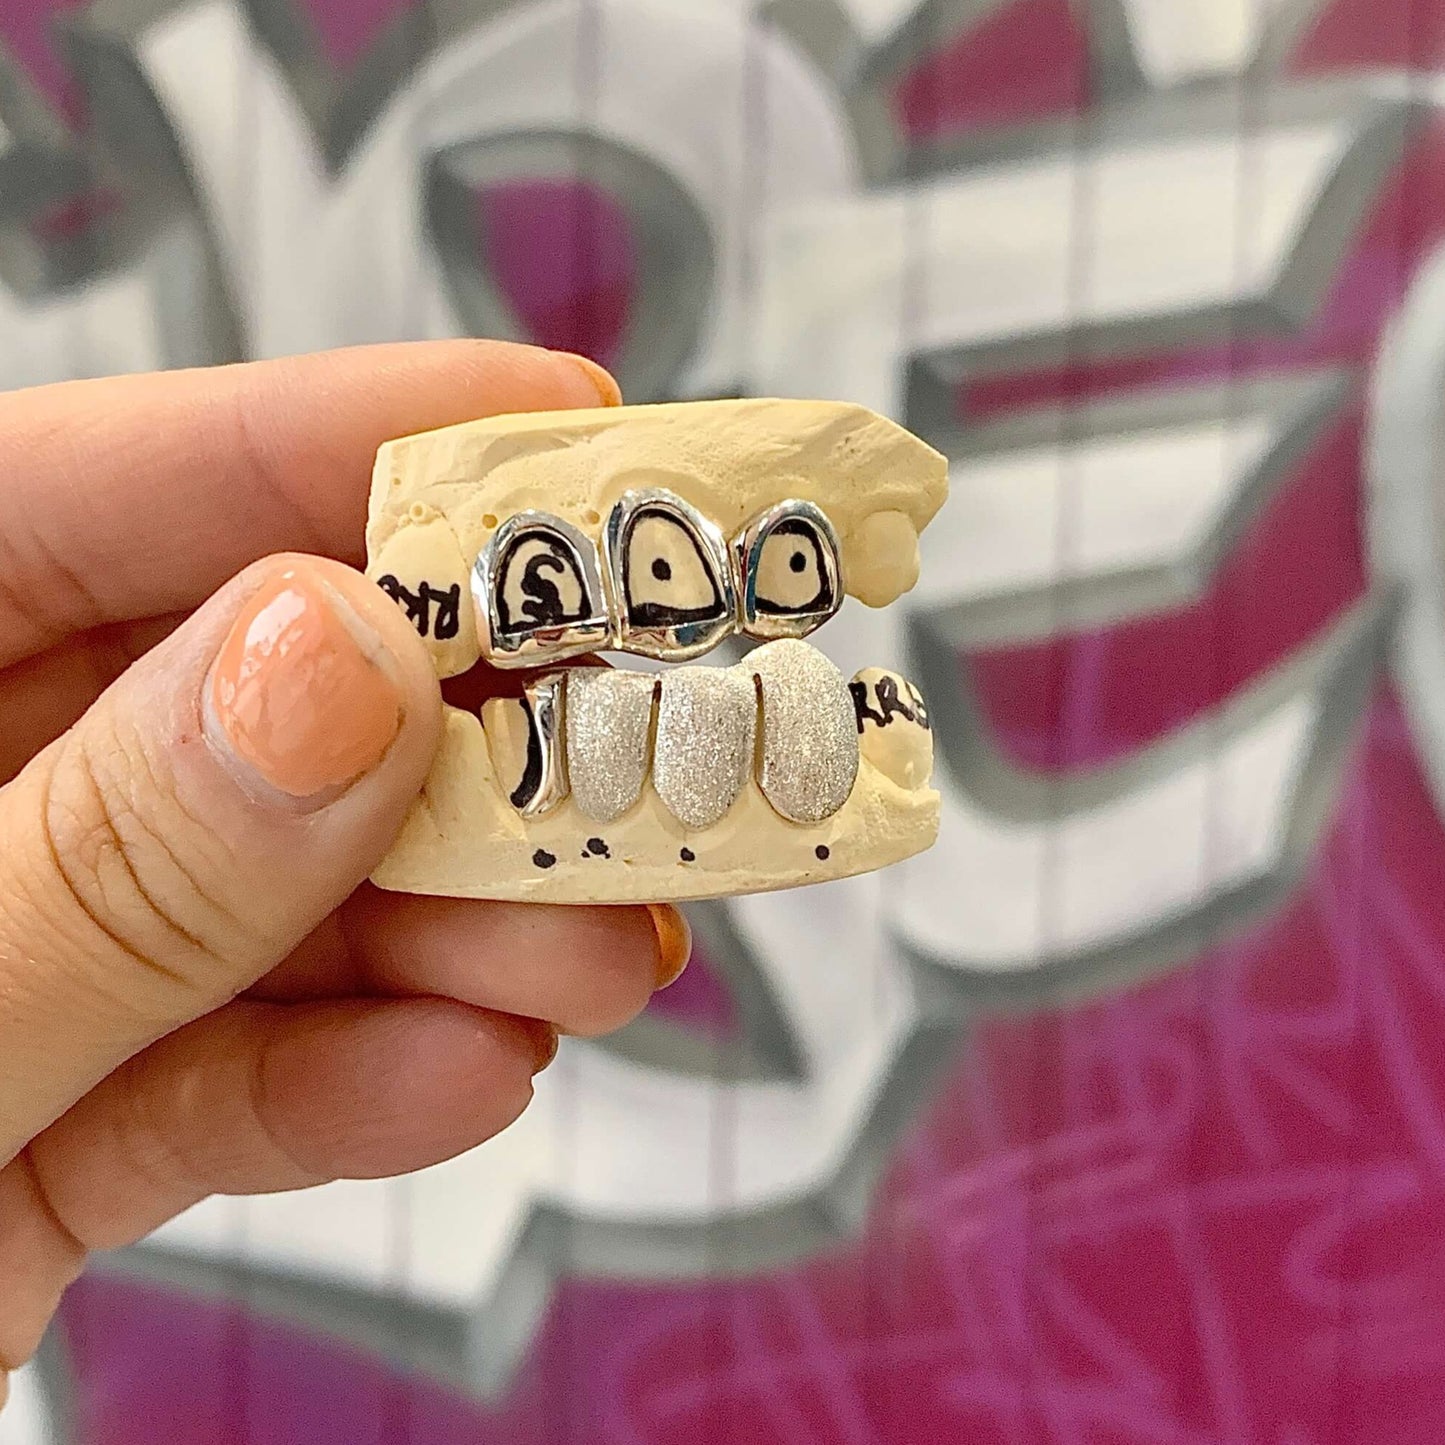 gold grillz, gold grillz aus, gold grillz australia, grillz australia, grills, gold caps, gold teeth, 10k caps, 10k gold grillz, 14k gold grillz, 18k gold grillz, how to order grillz, mouth house, mouth house grillz, custom gold grills, custom gold teeth, hip hop grillz, fang grillz, silver grillz, vampire grillz, open face grillz, solid grillz, diamond grillz, iced out teeth, rapper grillz, white gold grillz, rose gold grillz, bottom grillz, top grillz, VVS diamonds, VVS grillz, permanent gold crowns